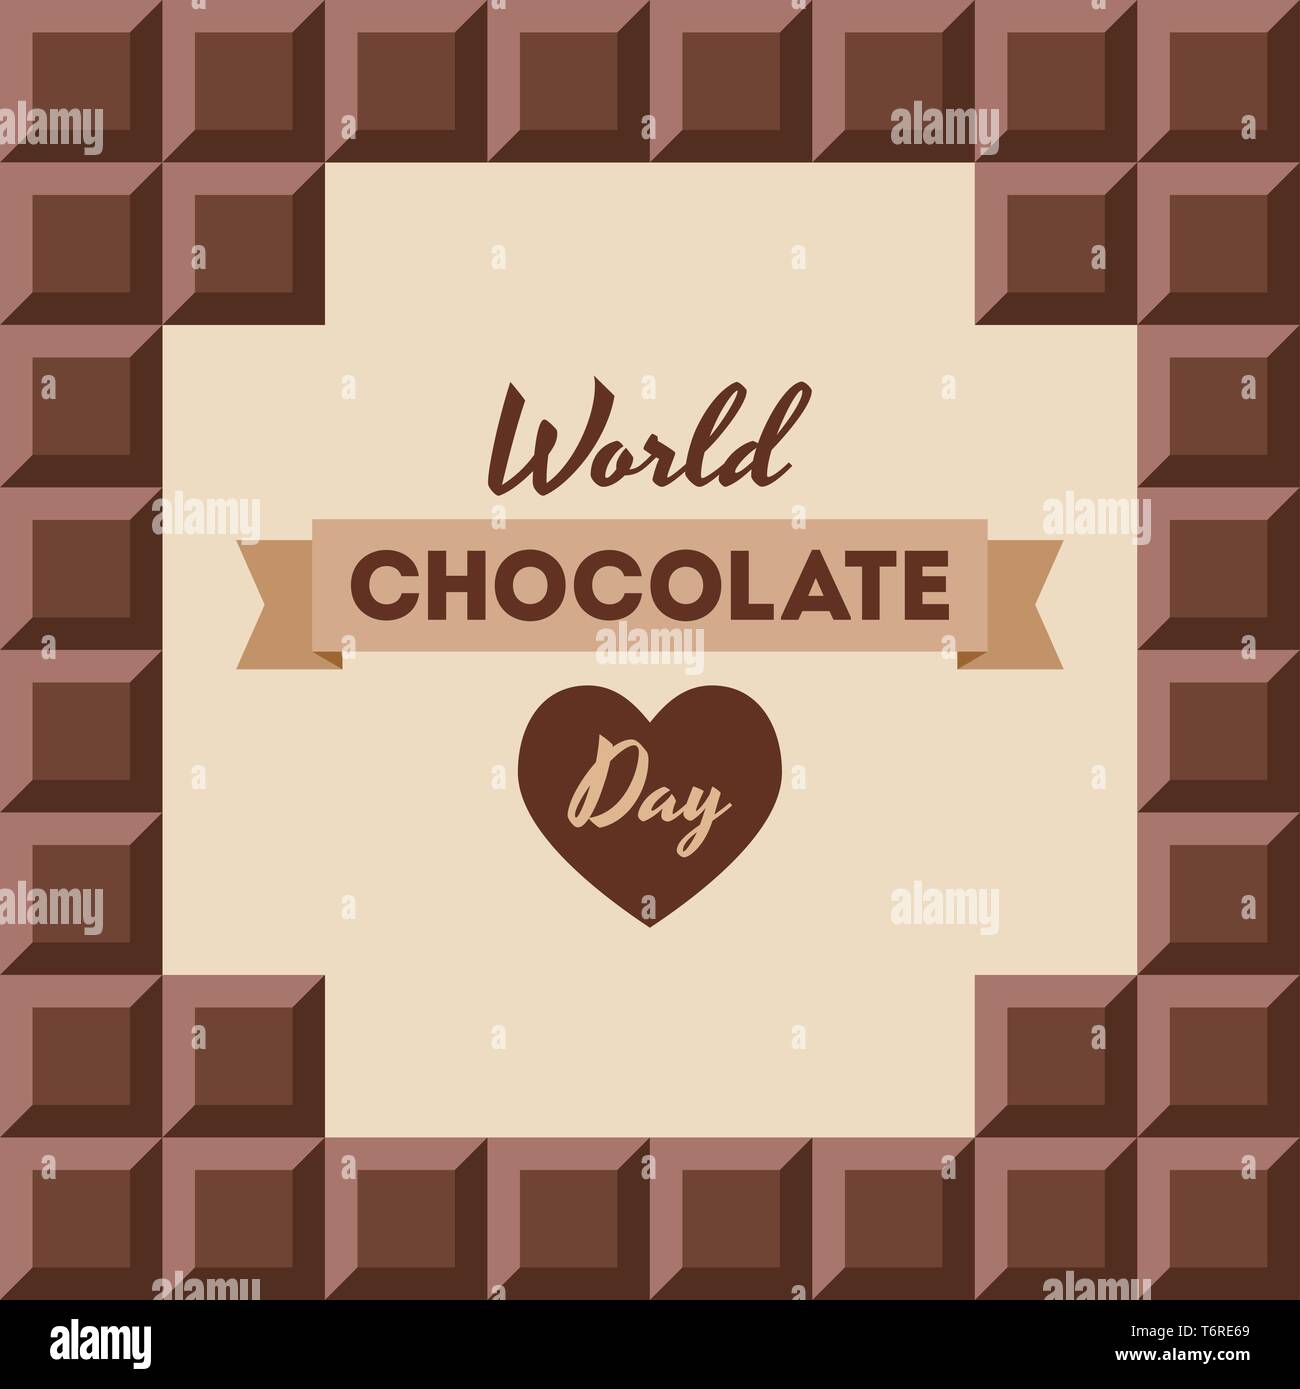 World Chocolate Day.11 July. Сhocolate bars with text inside. Design for poster, banner, greeting card. Seamless background. Vector color illustration Stock Vector